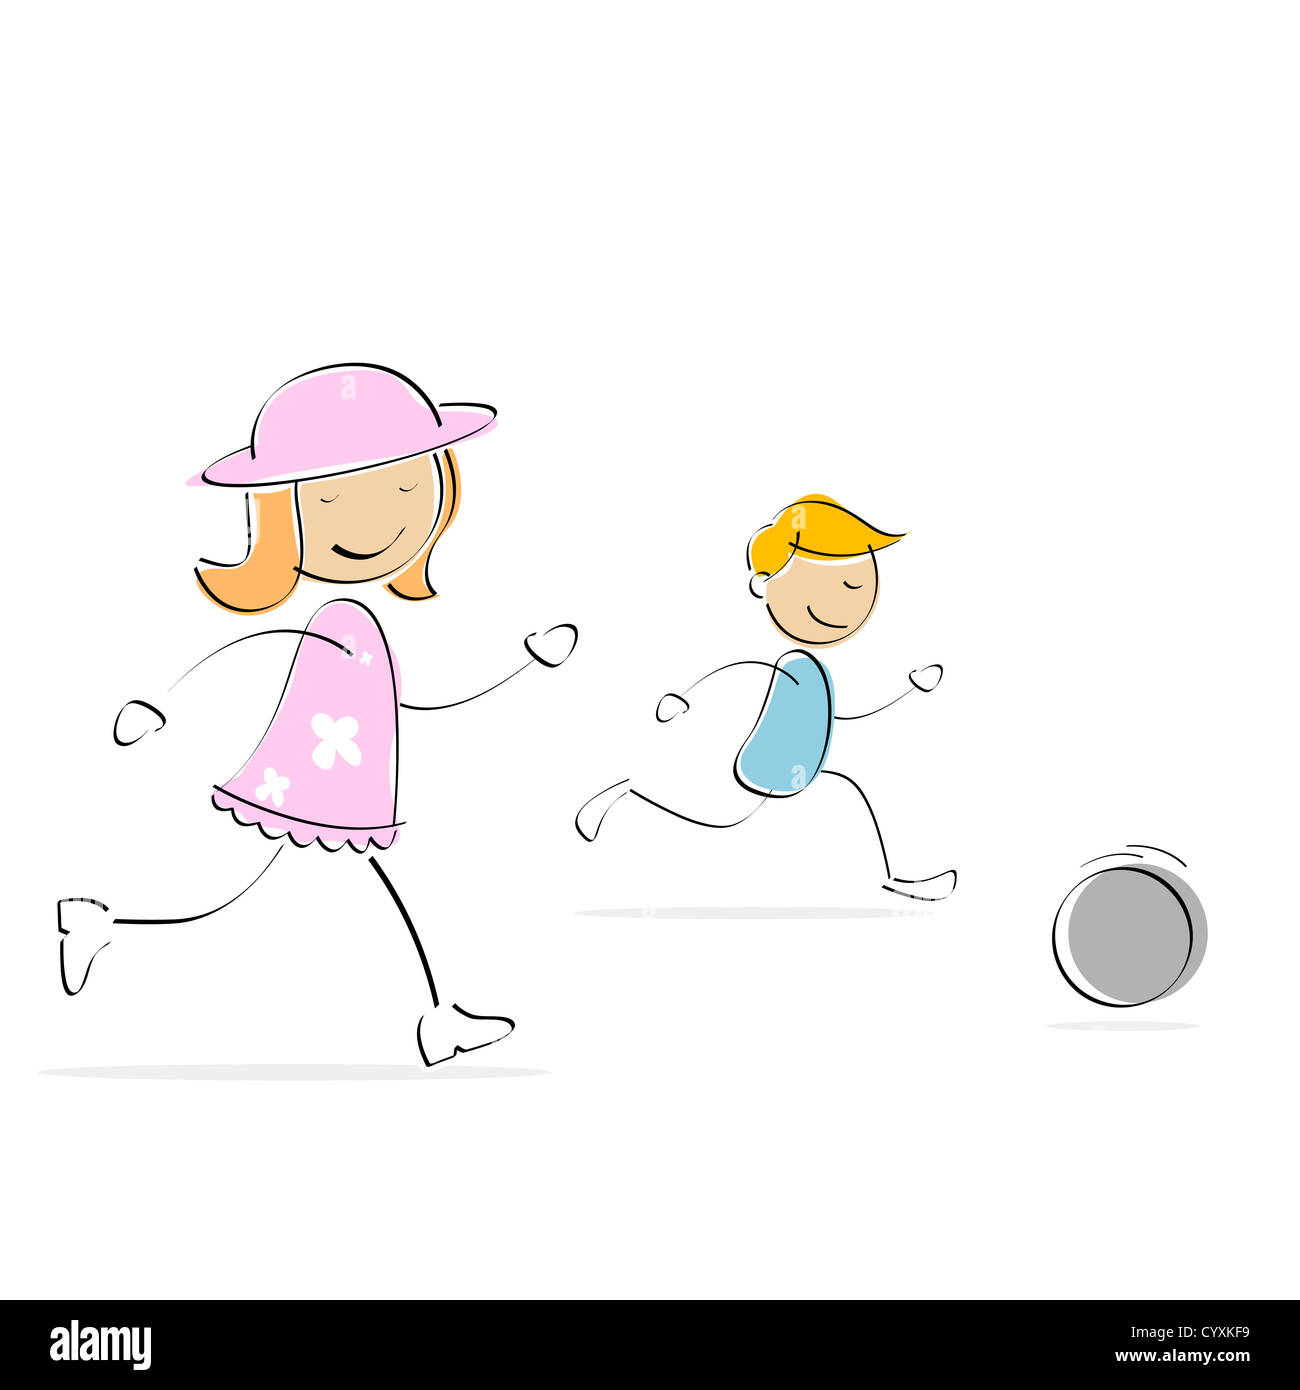 illustration of kids running behind soccerball on an isolated white background Stock Photo